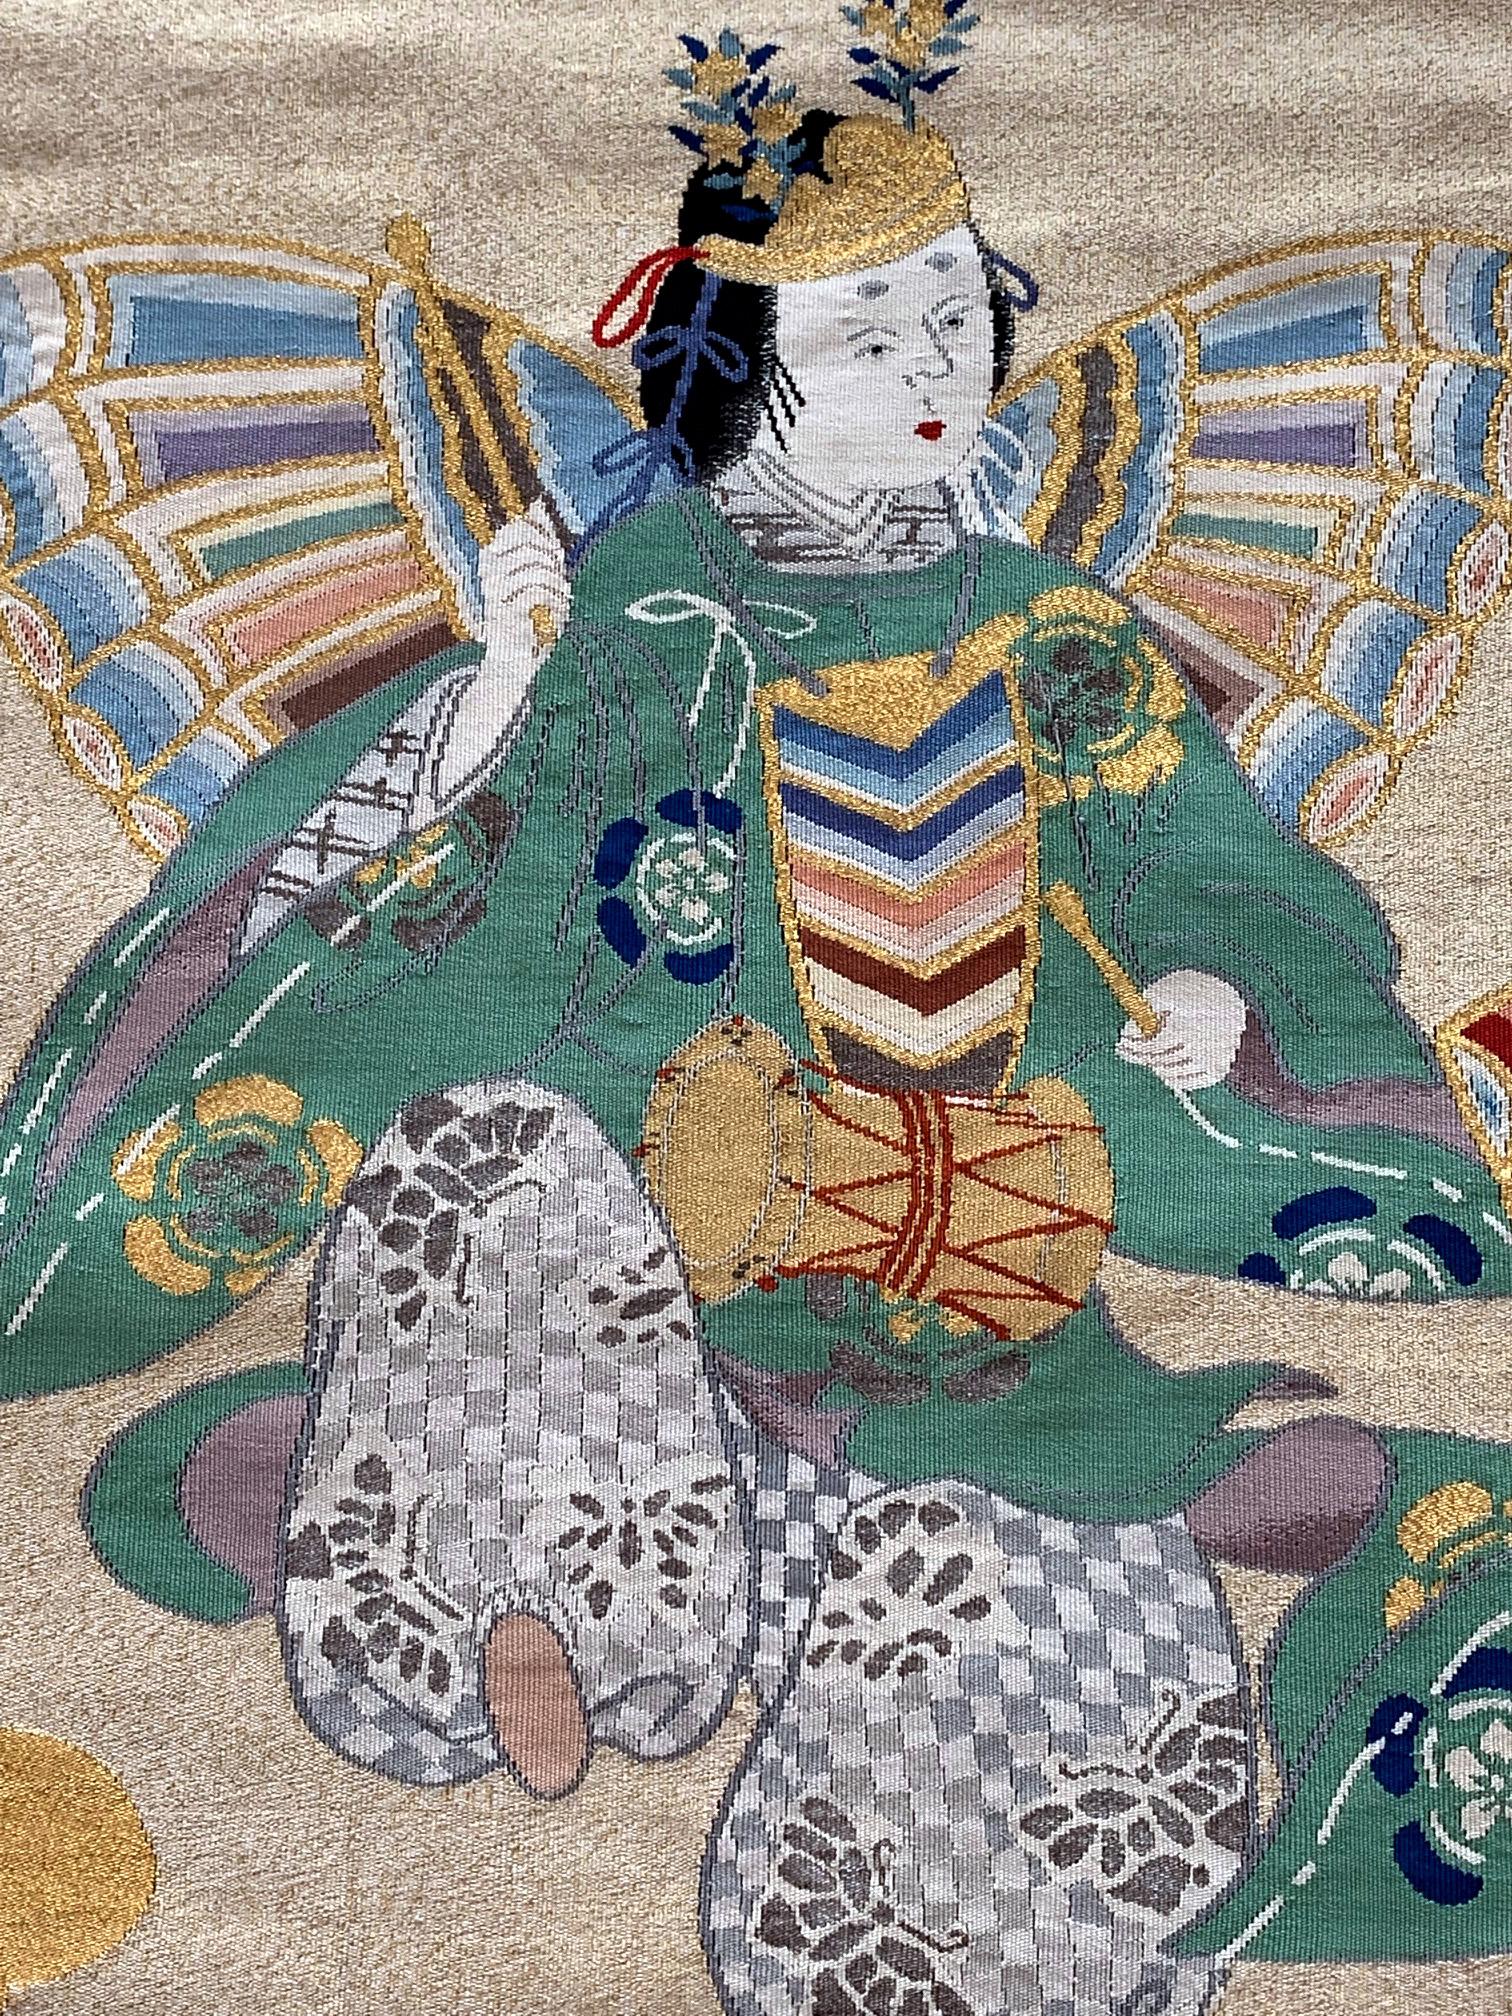 A Japanese antique Fukusa textile panel circa late 19th-early 20th century Meiji Period. On the woven tapestry background with gold thread forming clouds and mist, the main composition showcases two butterfly dancers, in embroidery with great